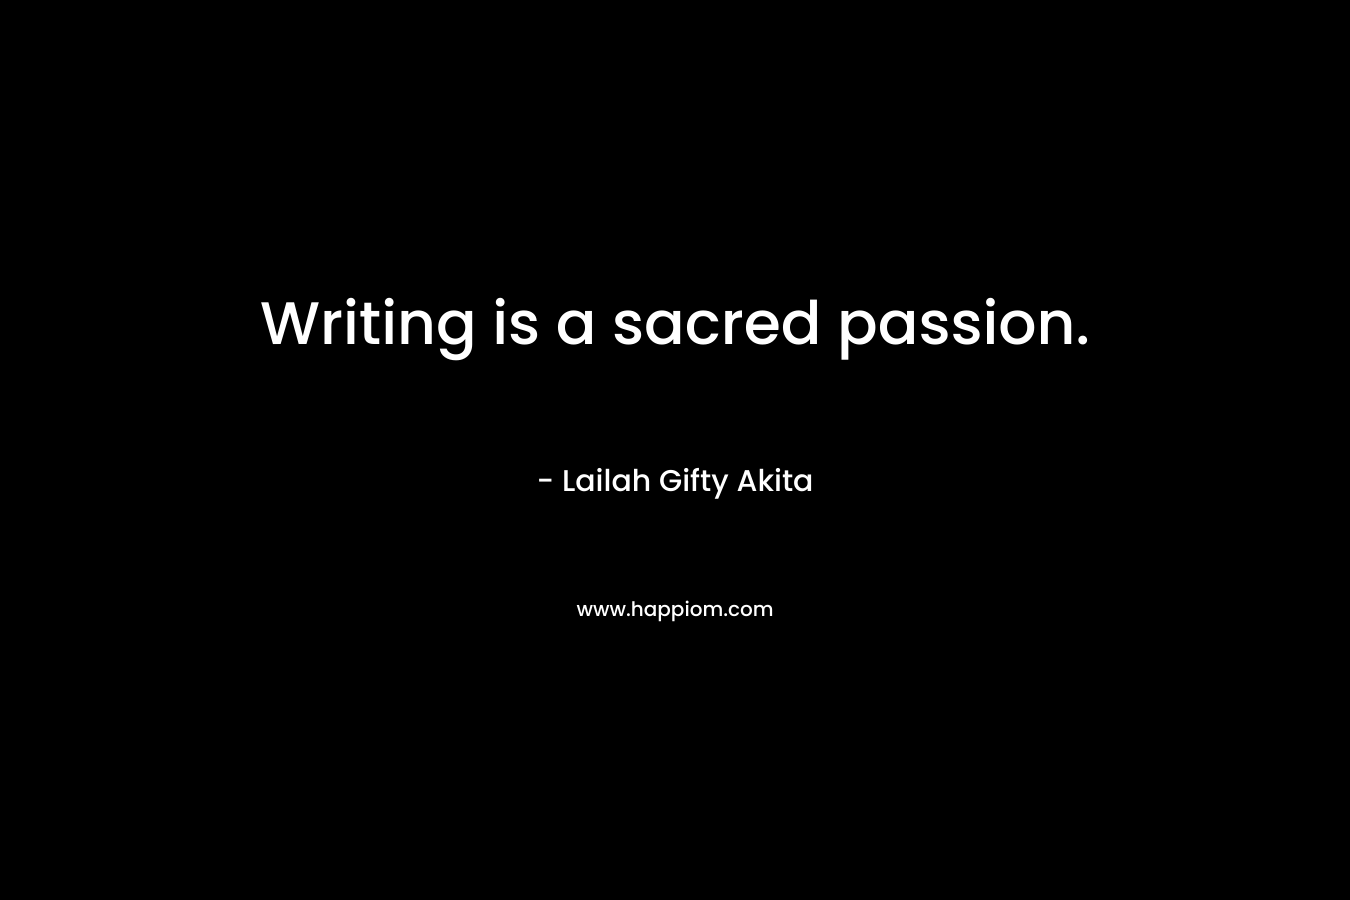 Writing is a sacred passion.